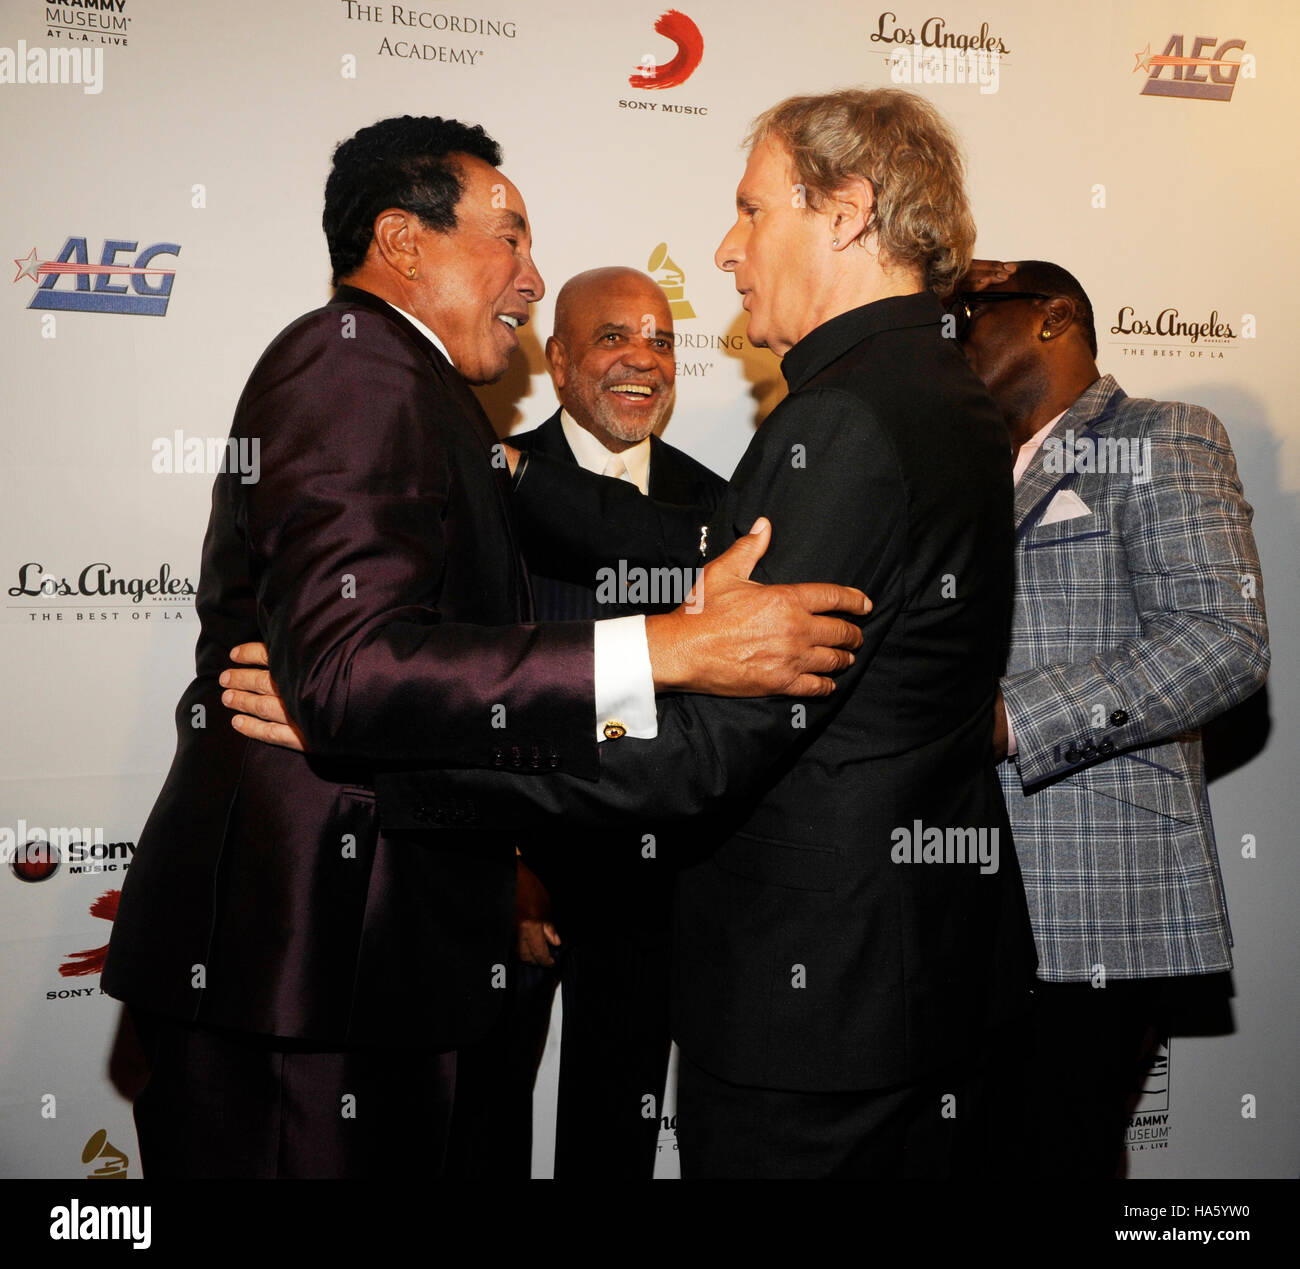 (L-R) GRAMMY winner Smokey Robinson, Motown founder Berry Gordy, Michael Bolton and Randy Jackson honored at the first-ever Architects of Sound Awards at the GRAMMY Museum on November 11, 2013 in Los Angeles, California. Stock Photo